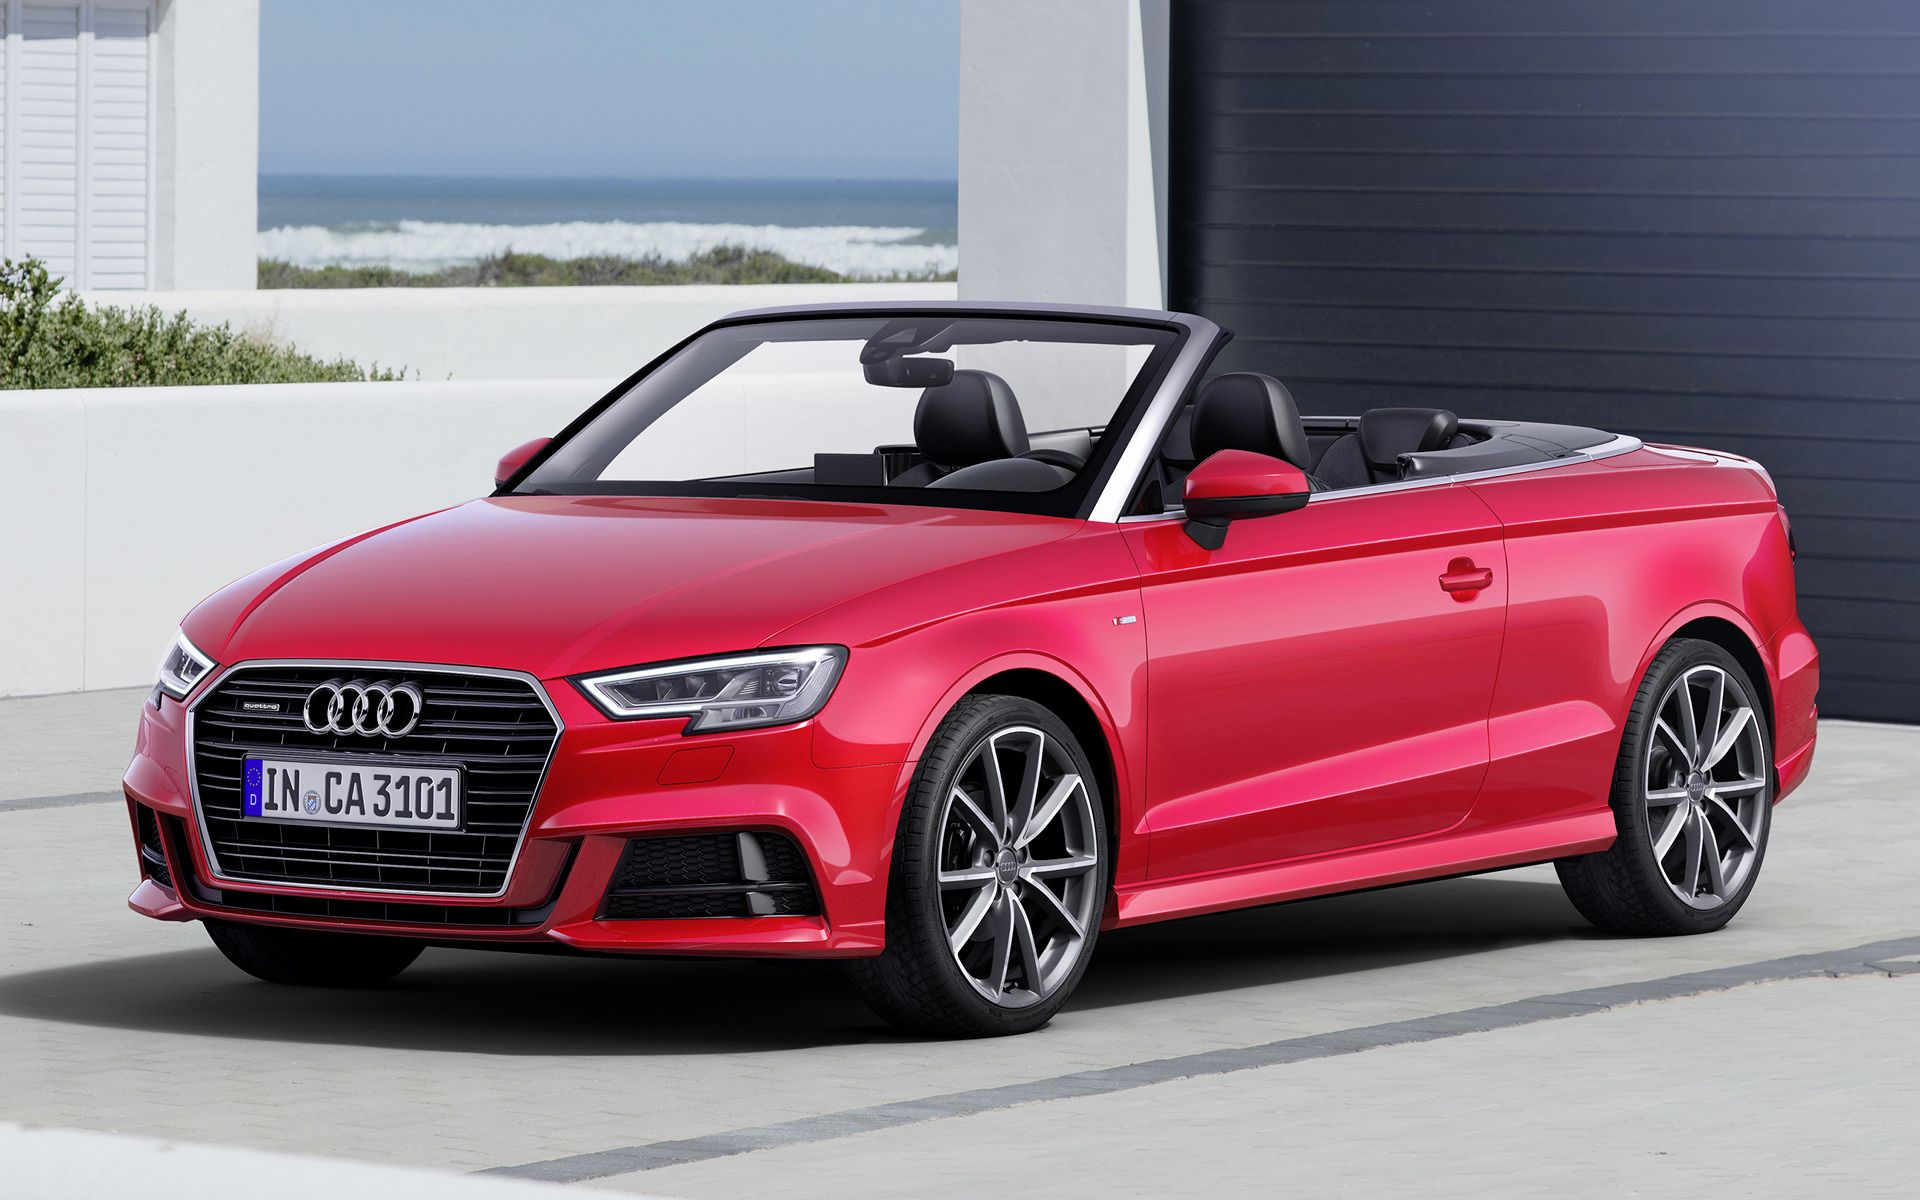 Audi A3 Cabriolet S line and HD Image